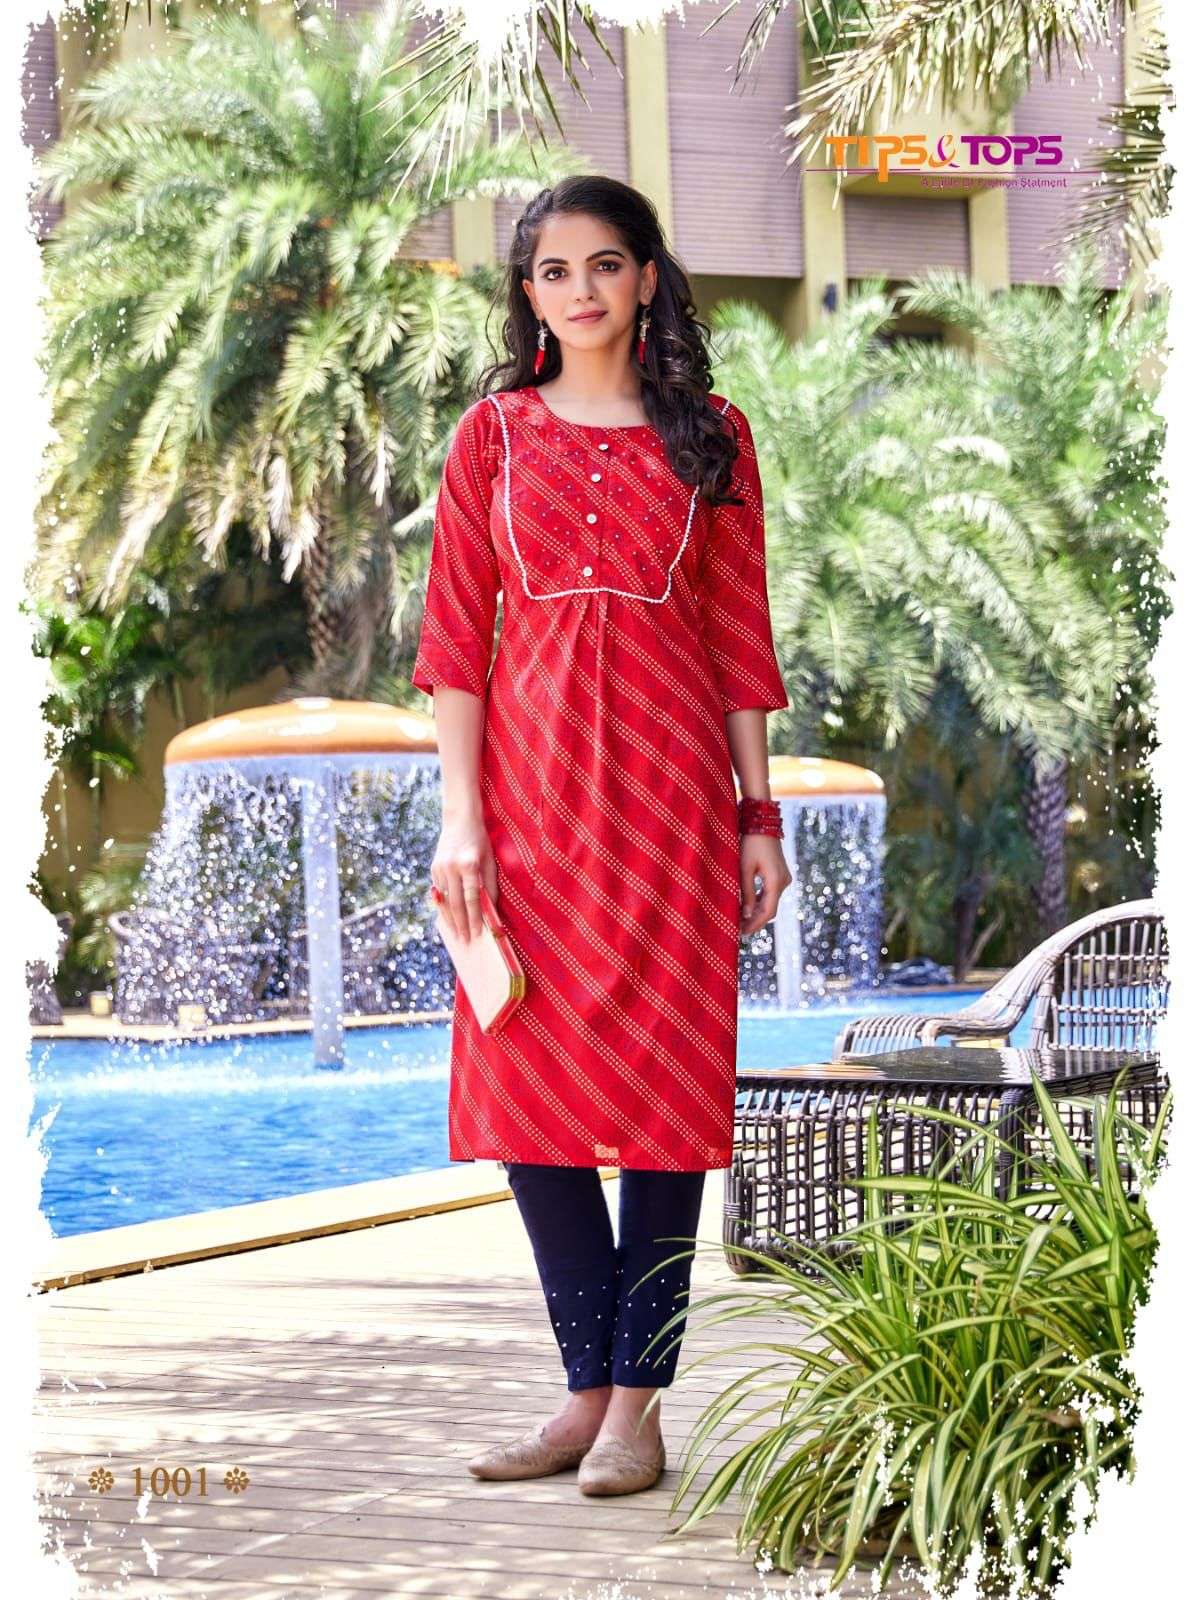 TIPS & TOPS PRESENT BANDHEJ VOL 3 READY TO DAILY WEAR RAYON WITH BANDHANI PRINTED KURTI PANT IN WHOLESALE PRICE IN SURAT - SAI DRESSES